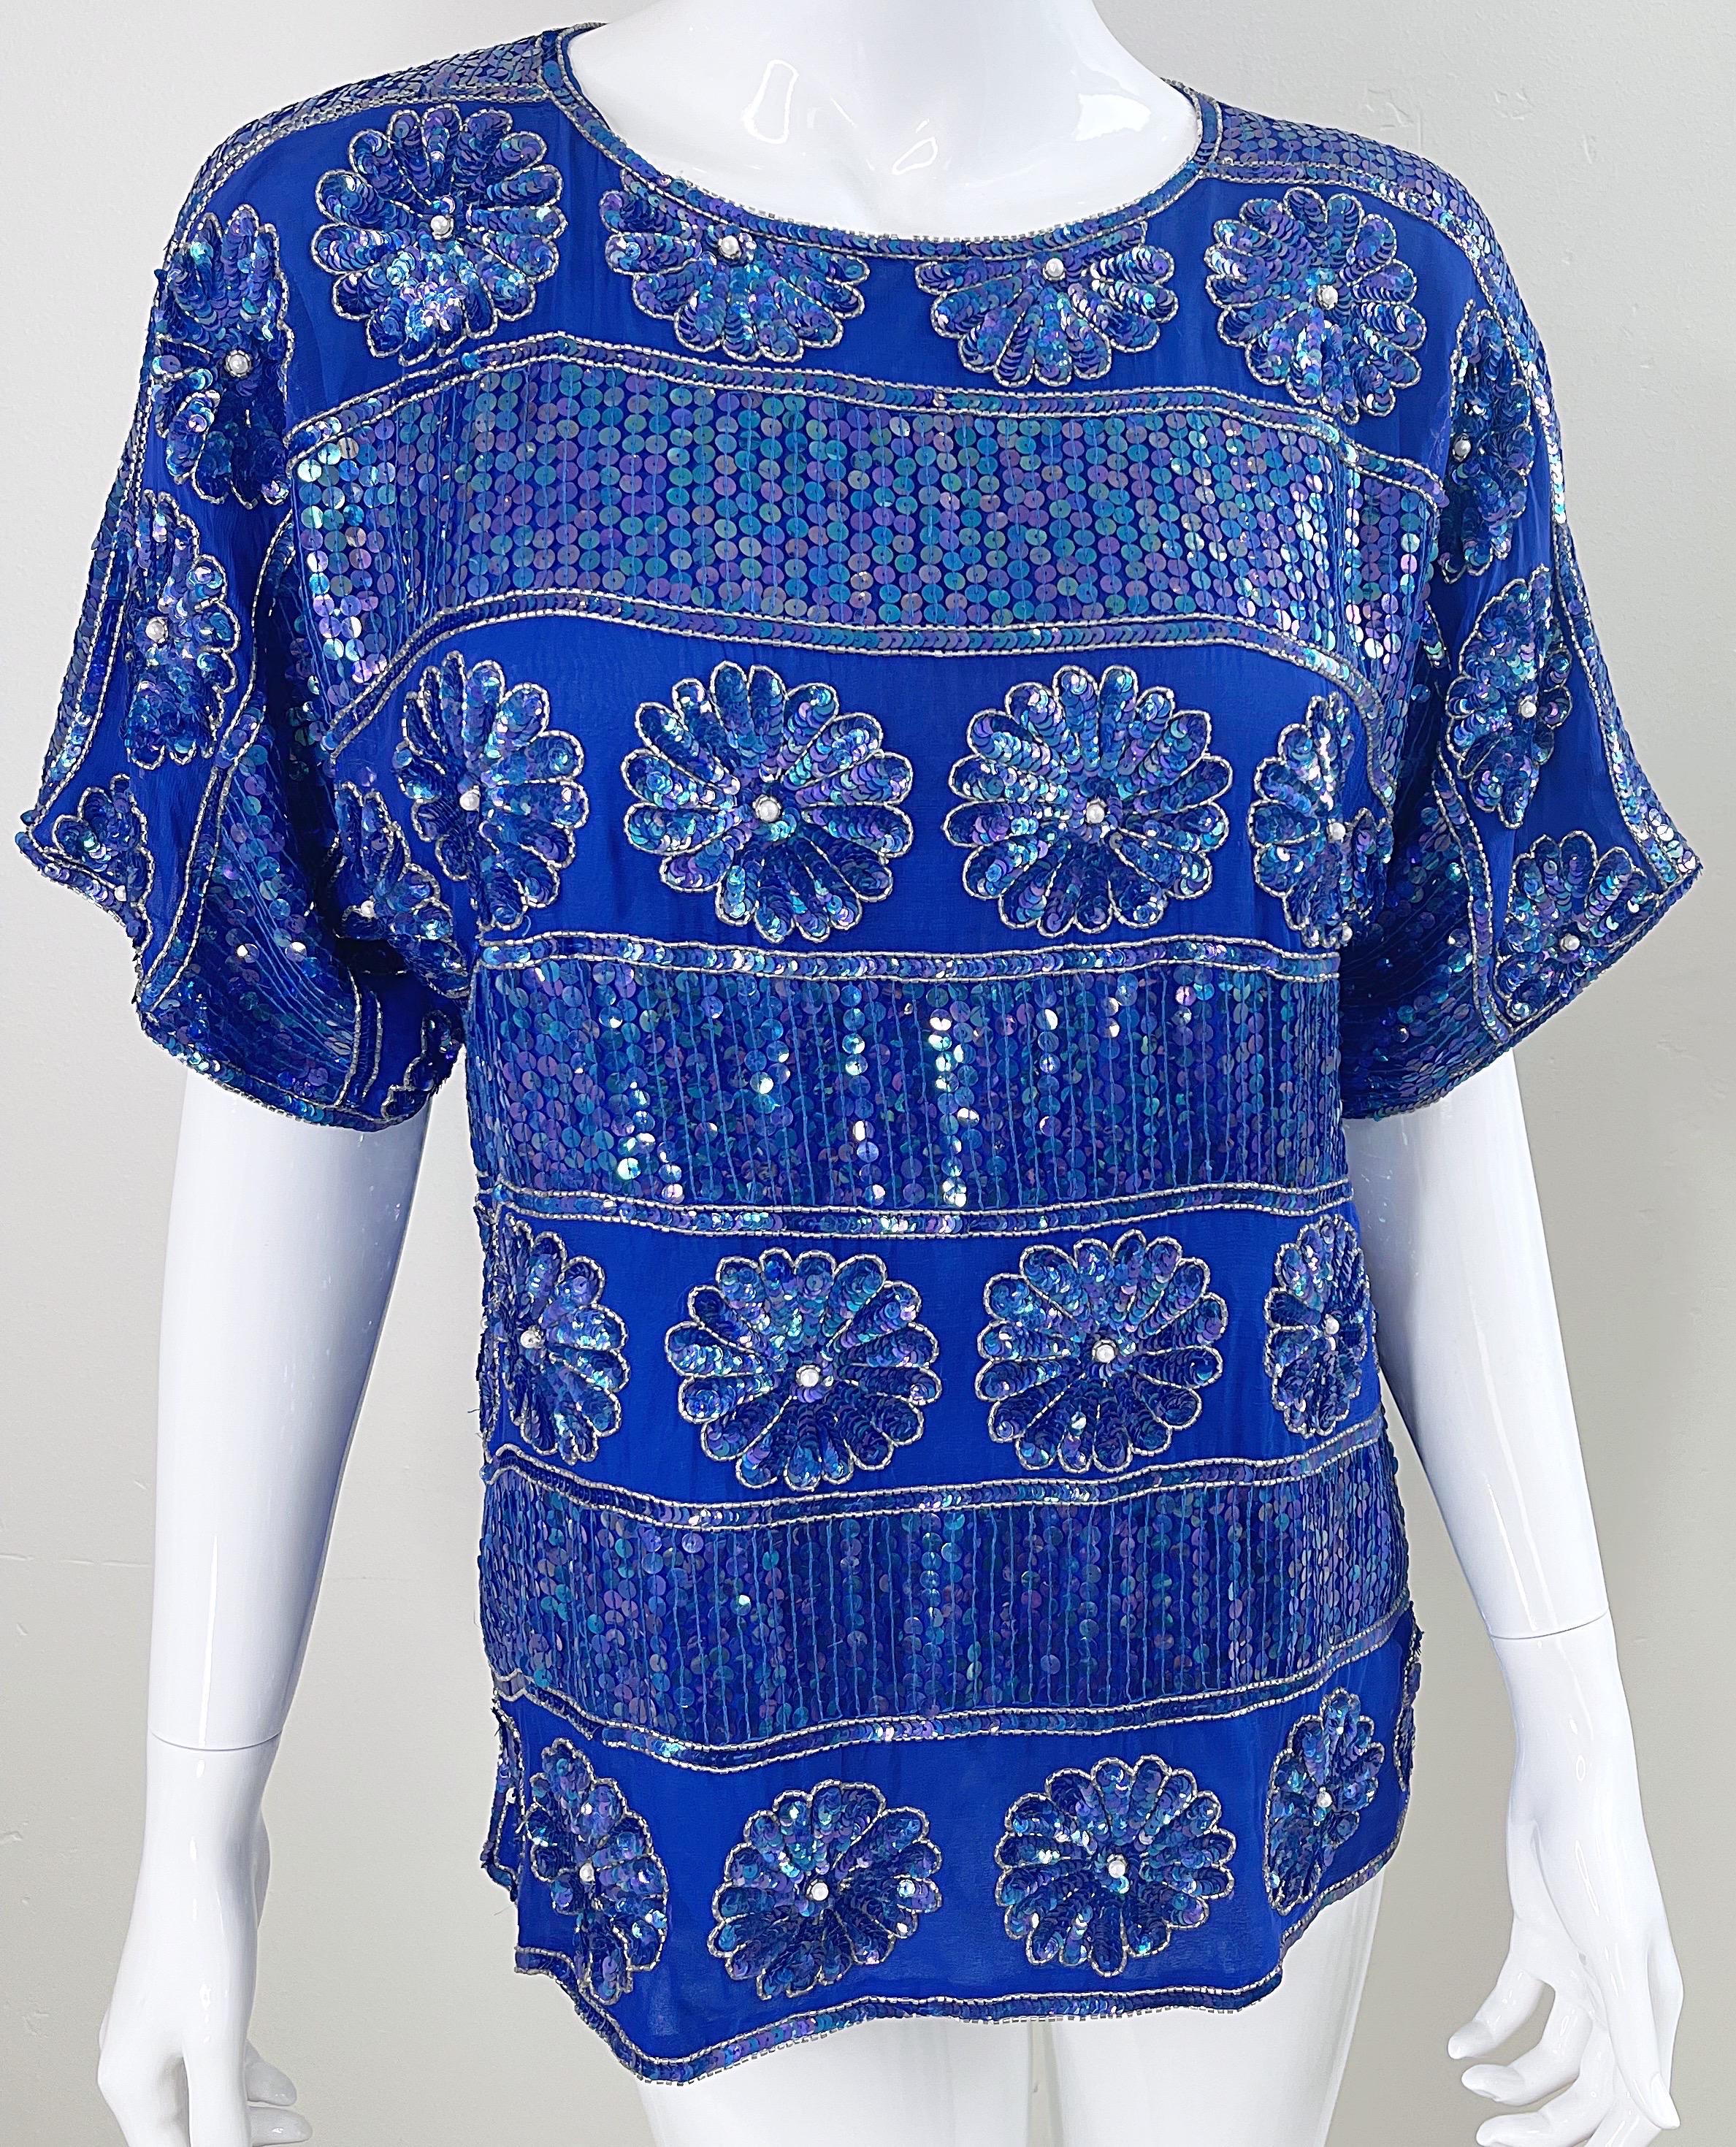 1980s Royal Blue Silk Chiffon Sequin Beaded Pearl Vintage 80s Blouse Shirt Top For Sale 6